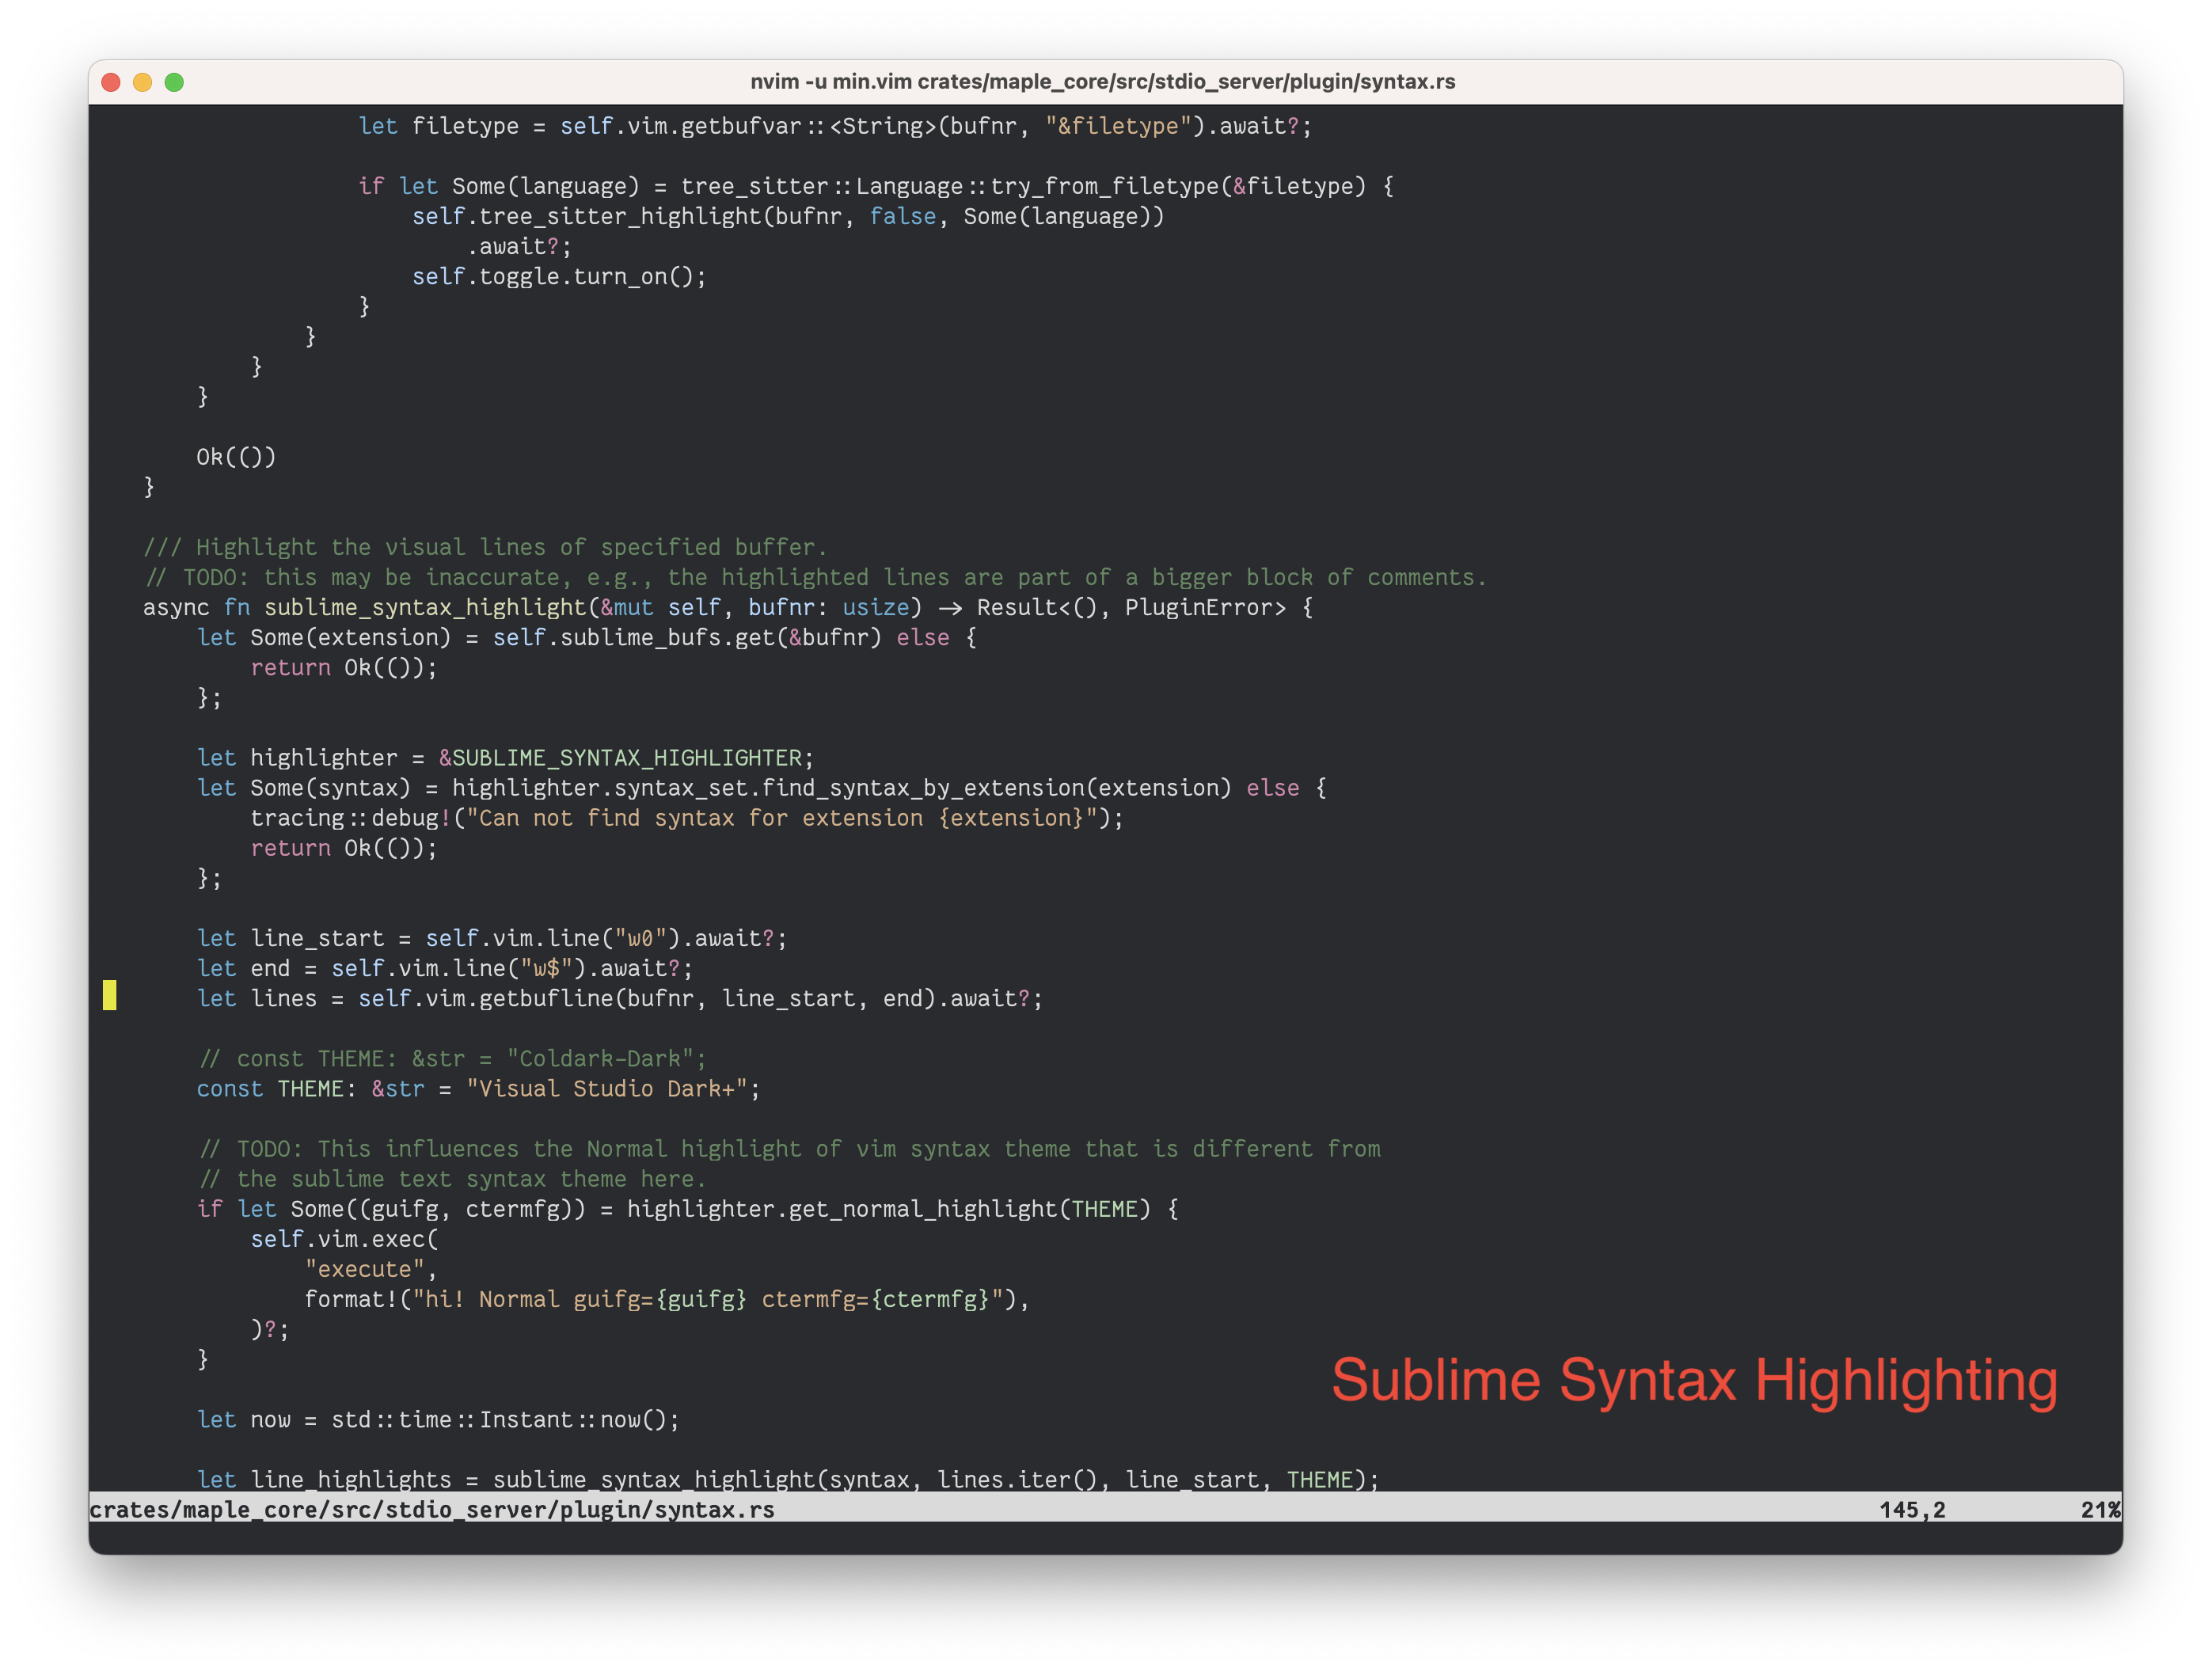 Sublime Syntax Highlighting